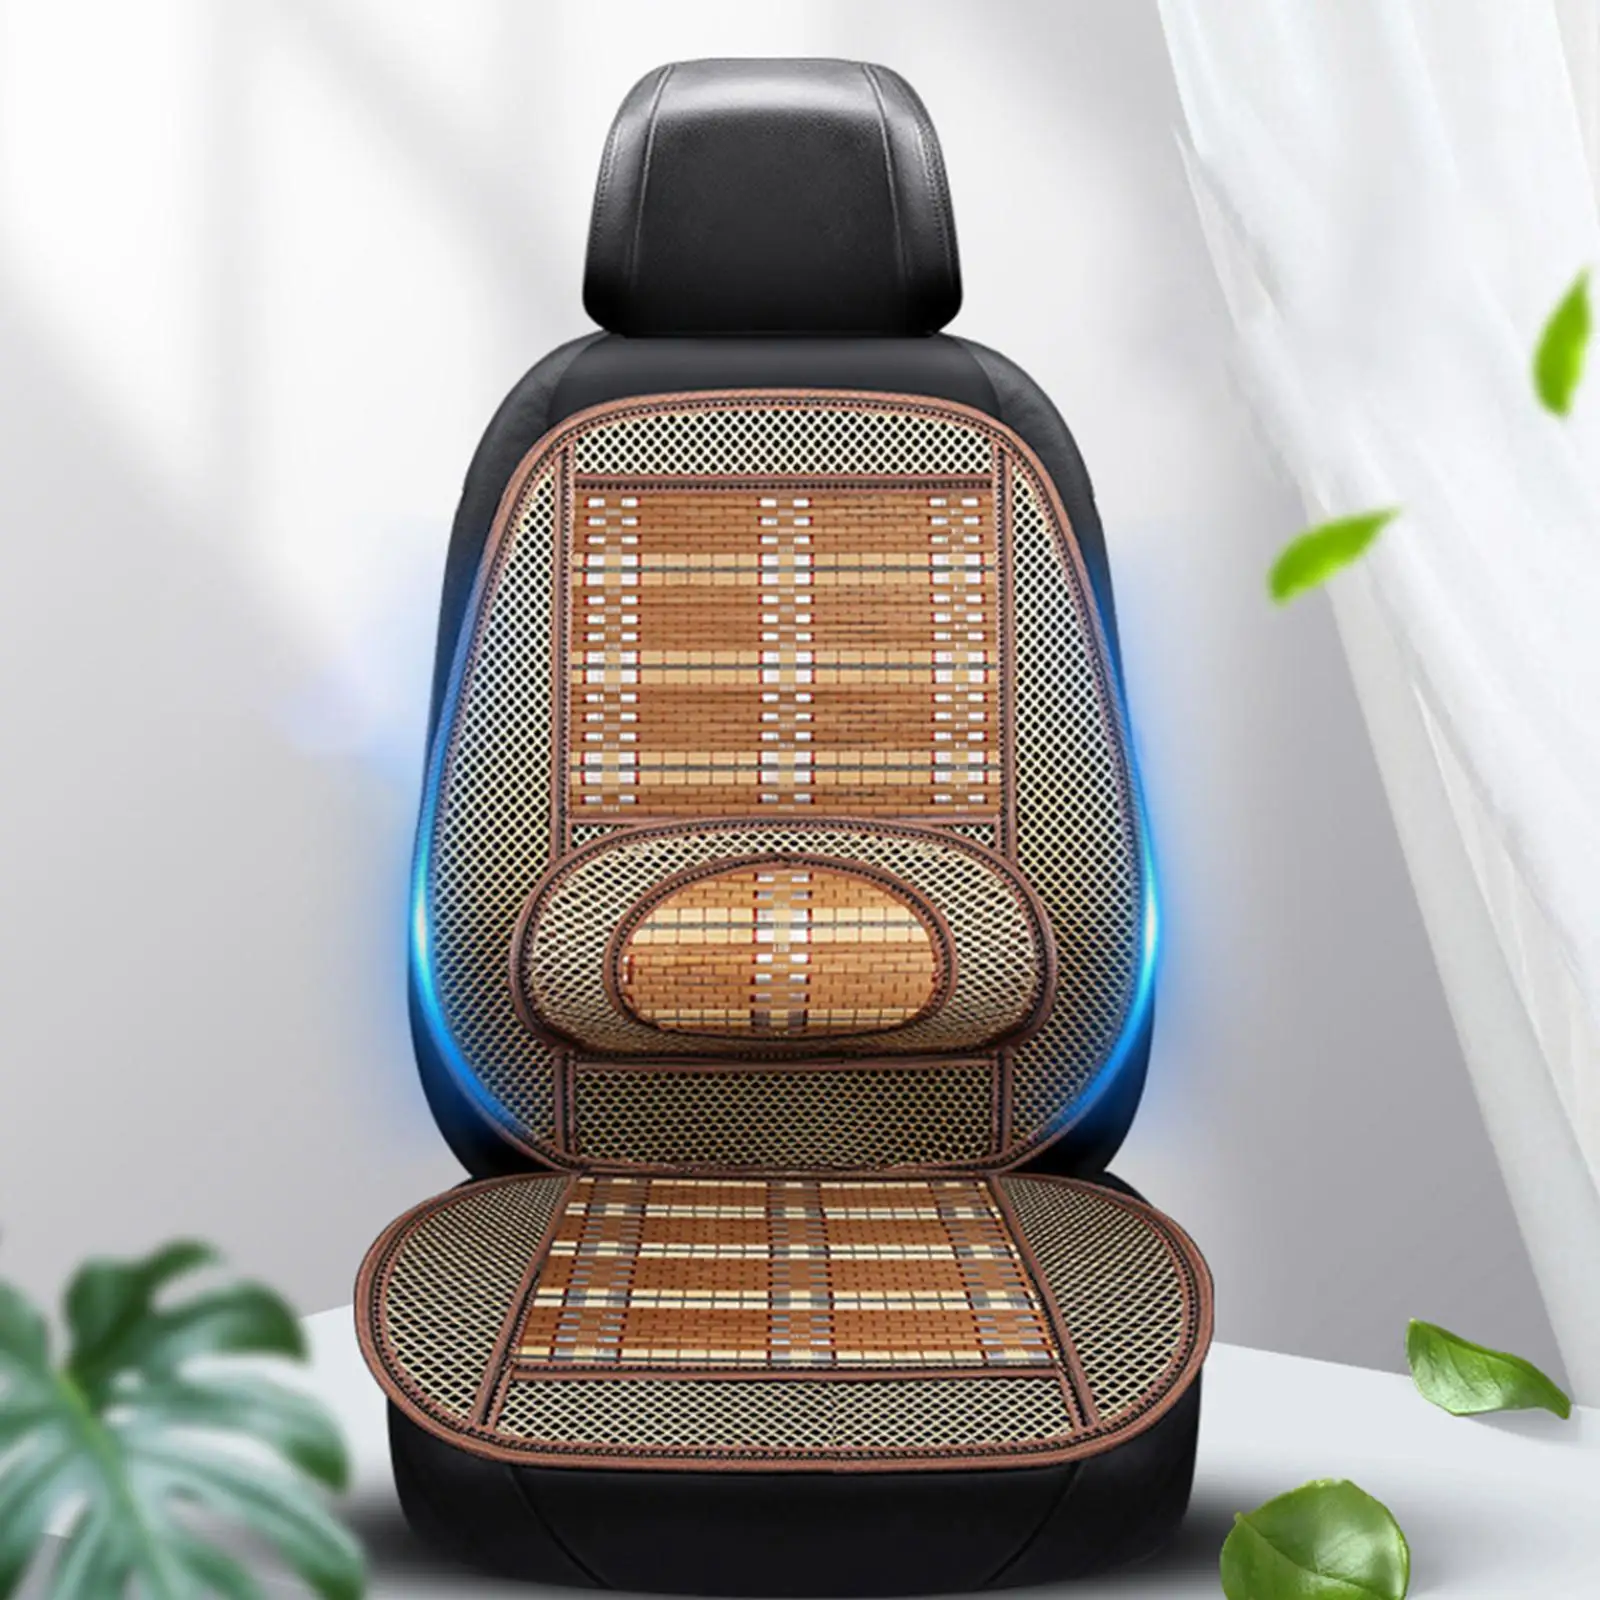 Car Summer Seat Cushion Seat Cover Backrest Seat Pad for Car Seat Chair